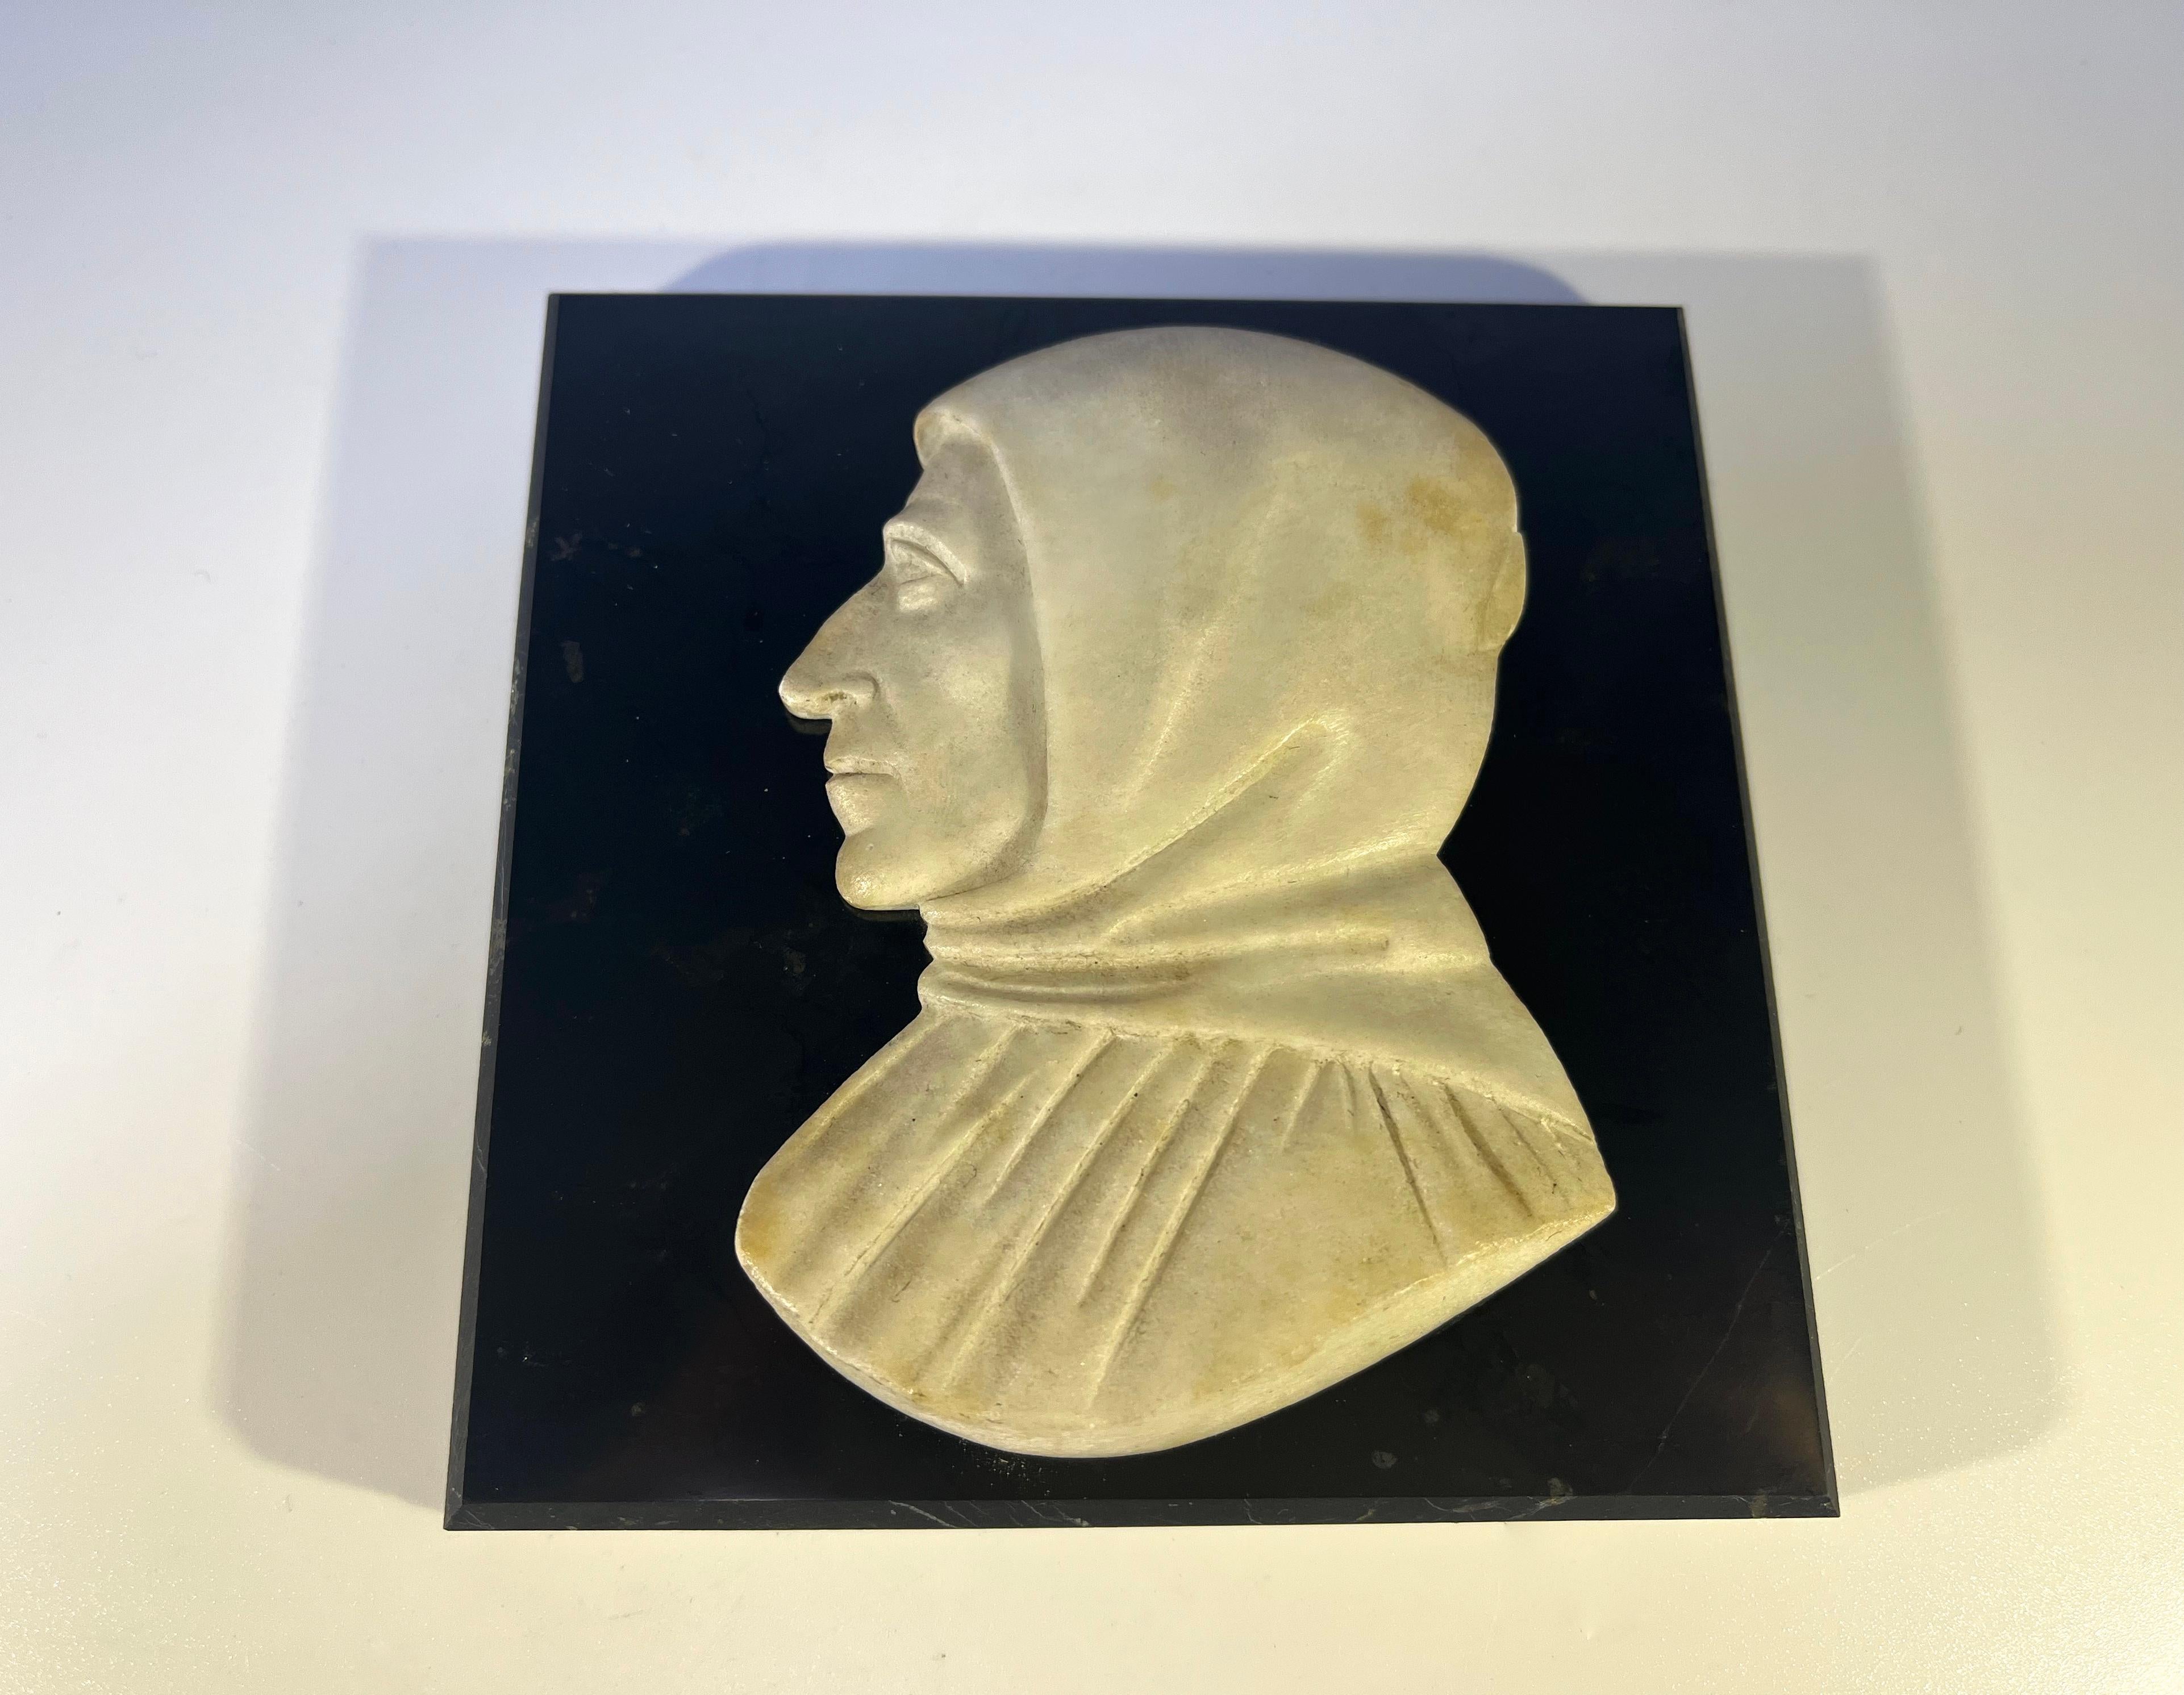 Hand-Carved Grand Tour Of Italy Souvenir, Carrara Marble Cameo Paperweight c19th Century For Sale